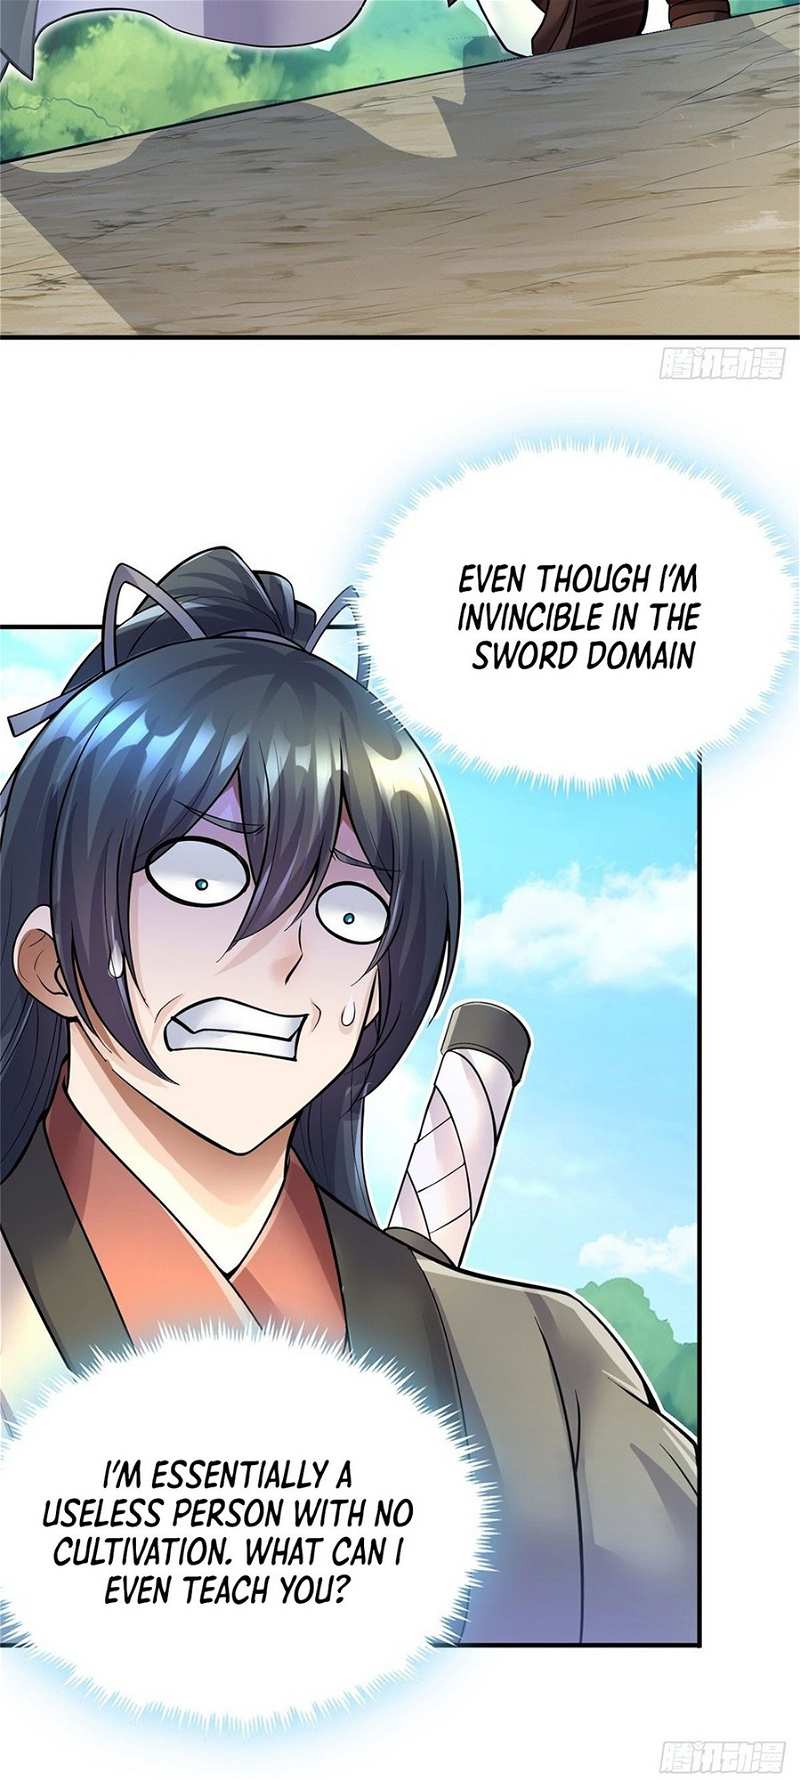 With A Sword Domain, I Can Become The Sword Saint chapter 14 - page 7